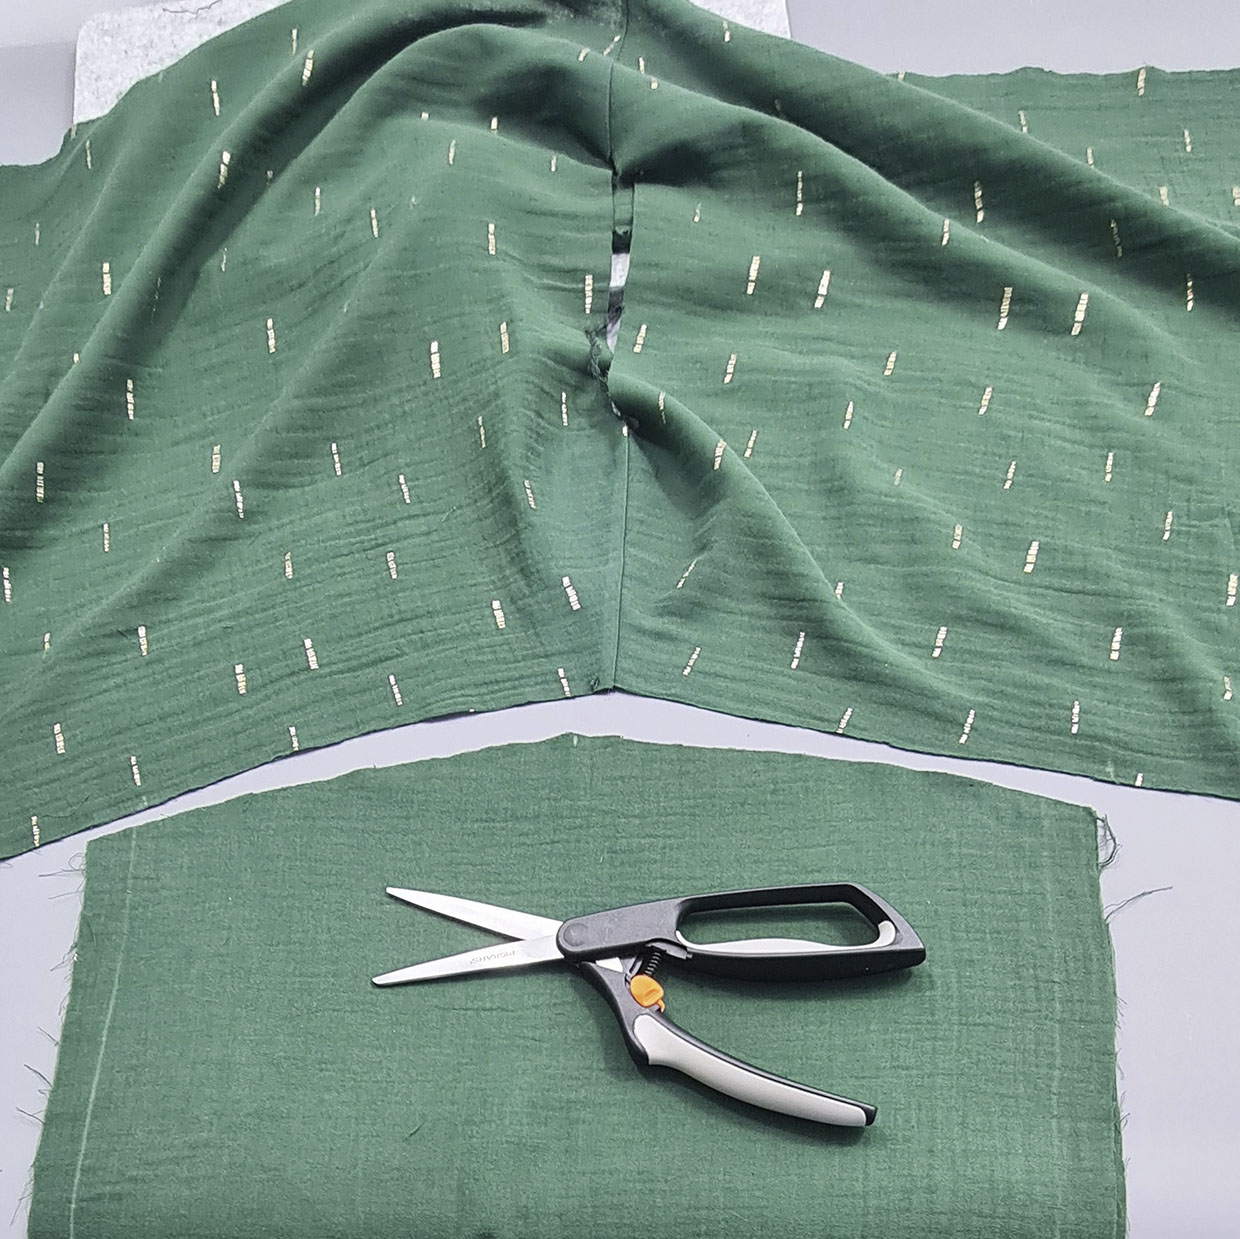 Step 3 – sewing the shoulders